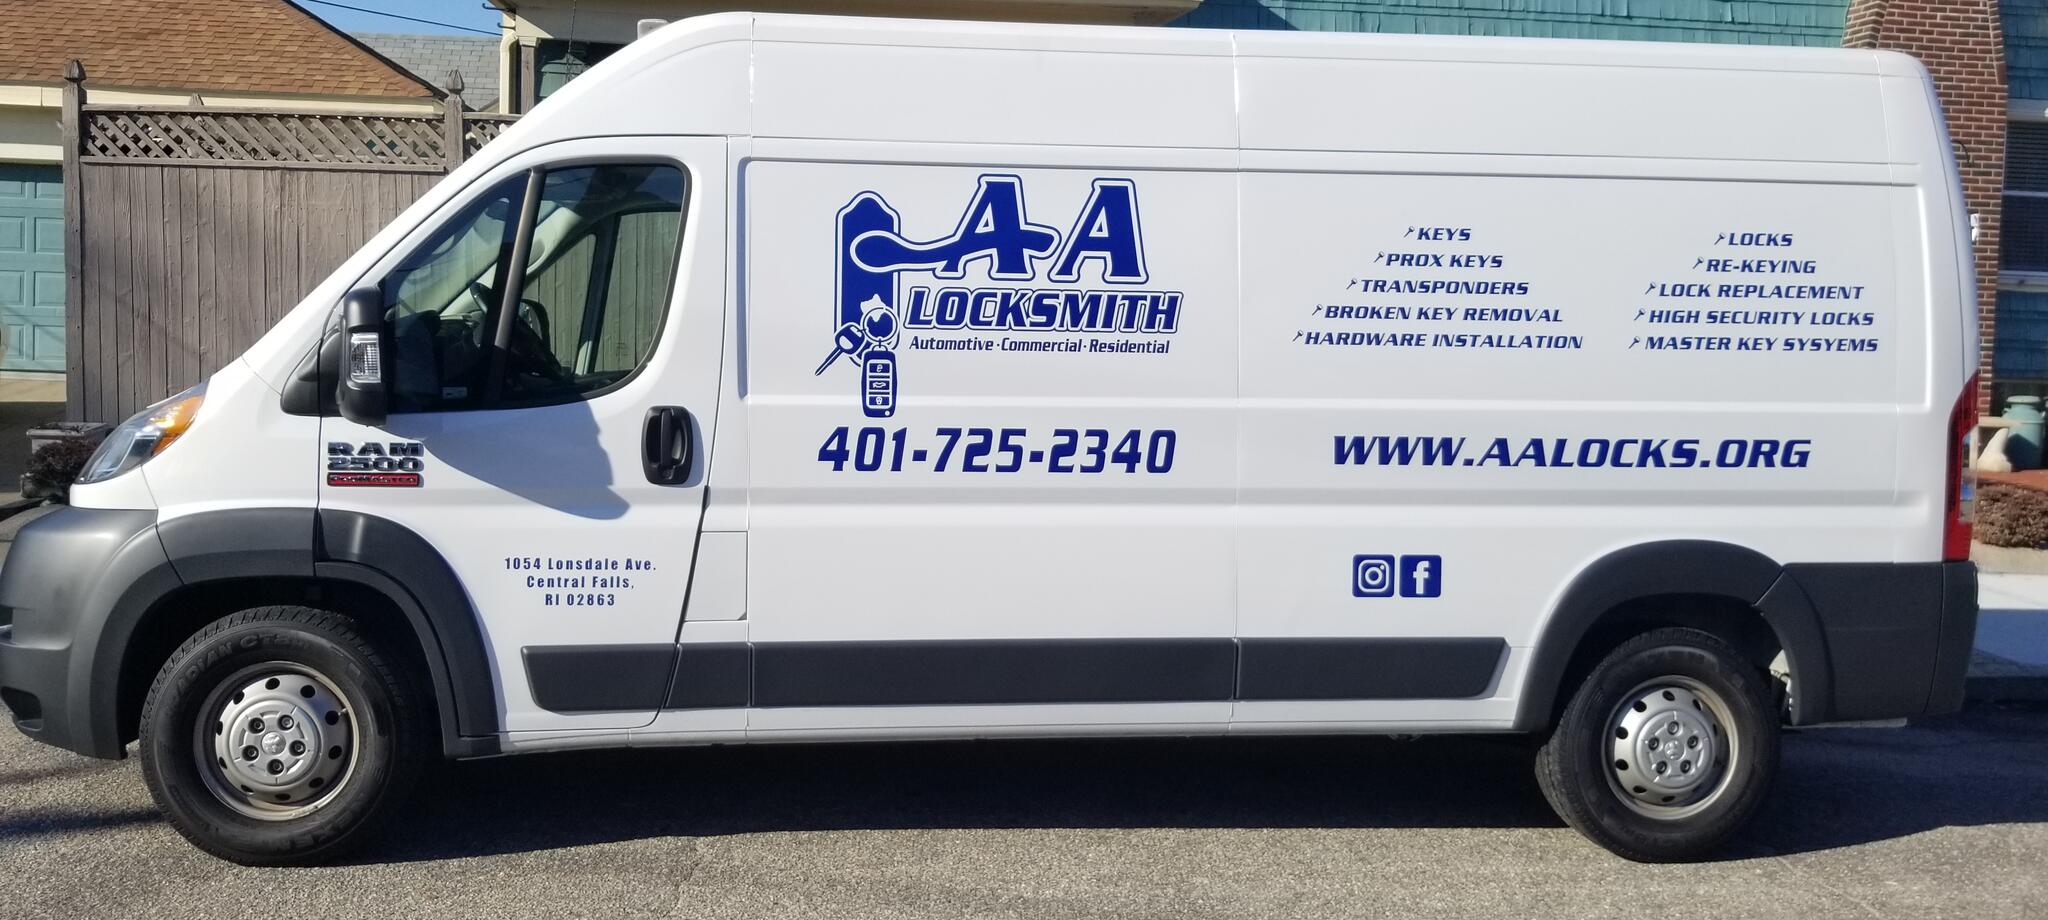 AA Locksmith 1054 Lonsdale Ave, Central Falls Rhode Island 02863